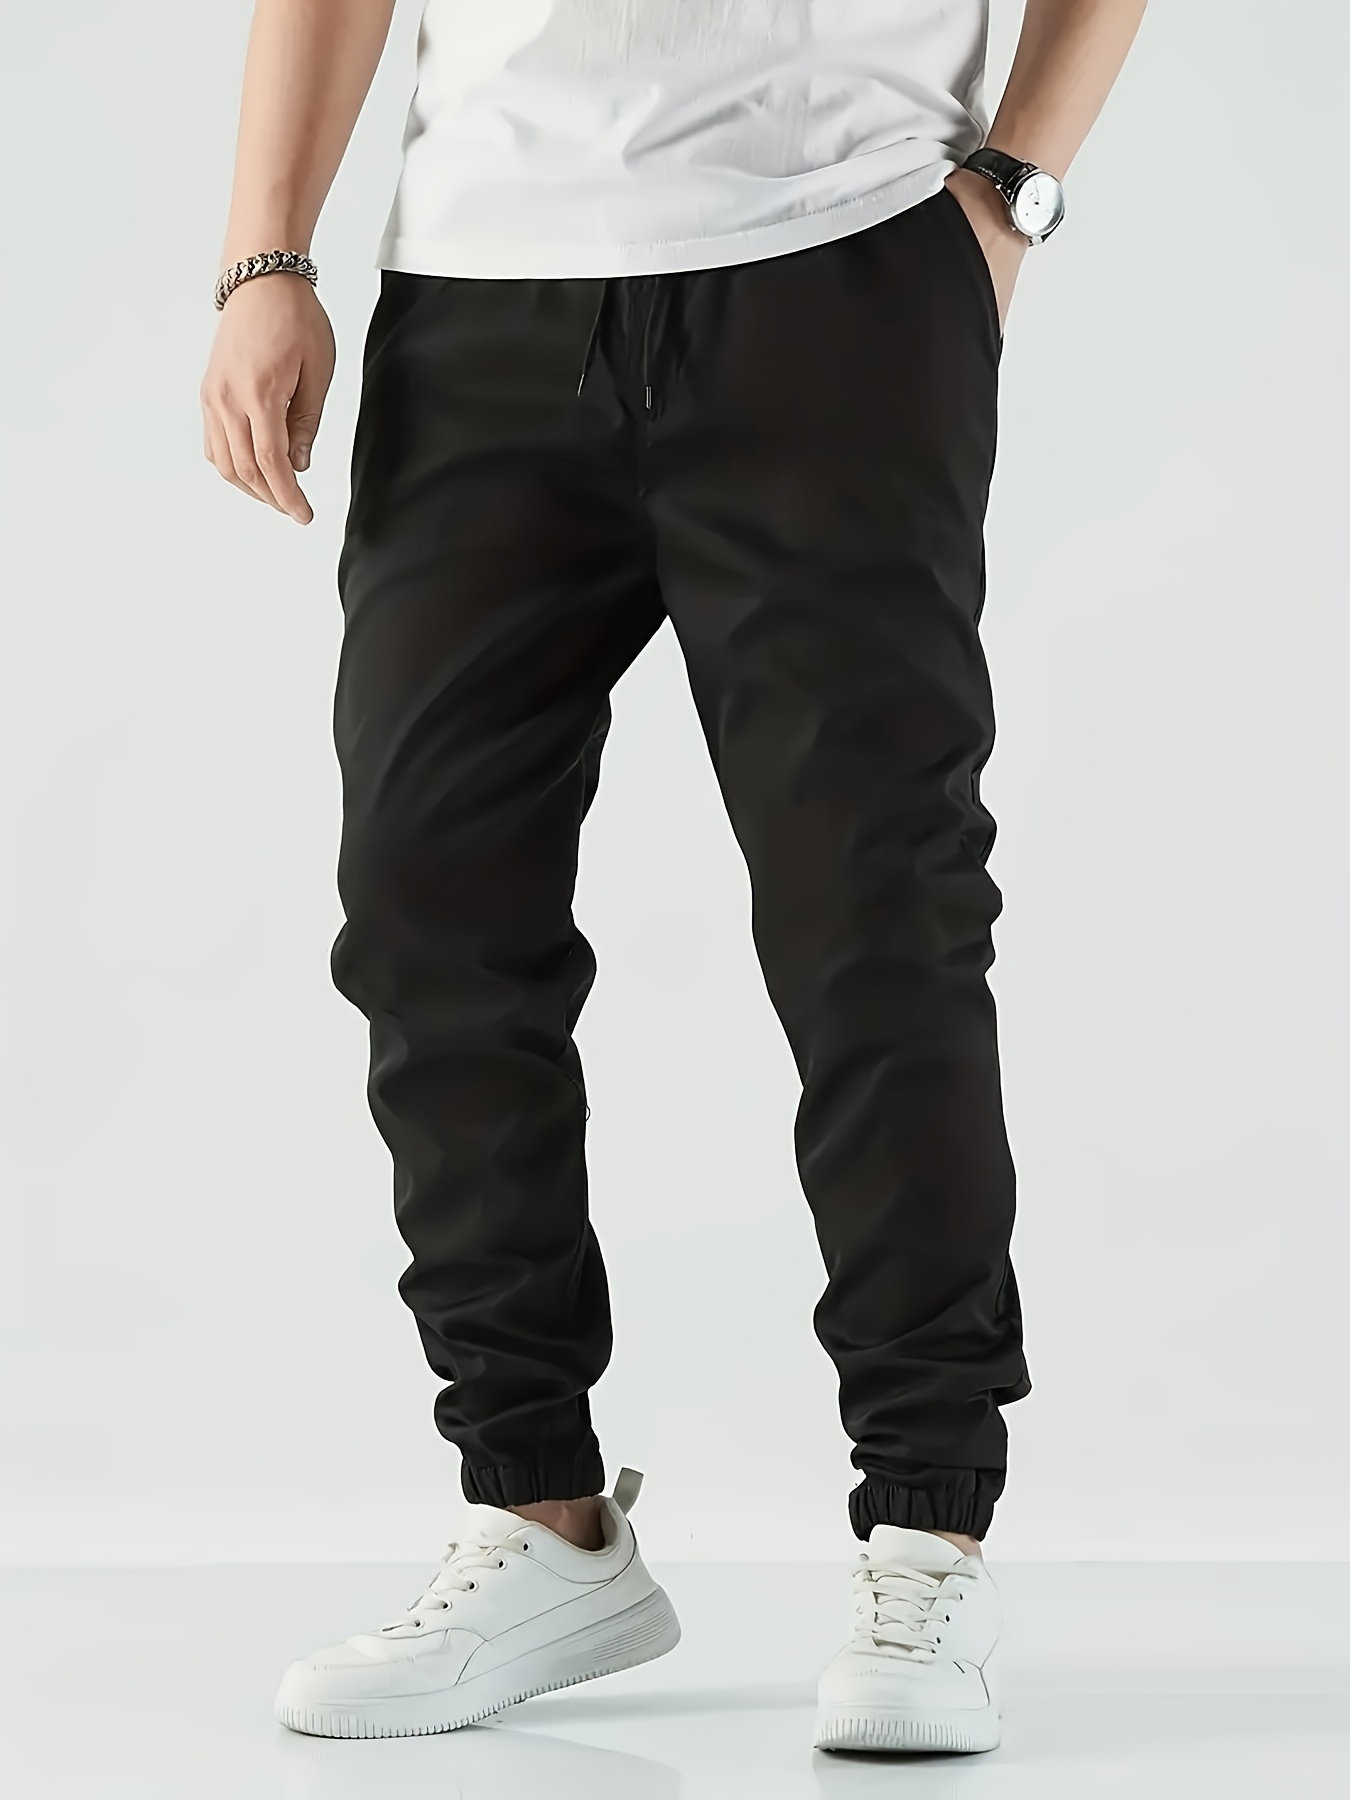 Men's Black Solid Winter Joggers – Fitkin